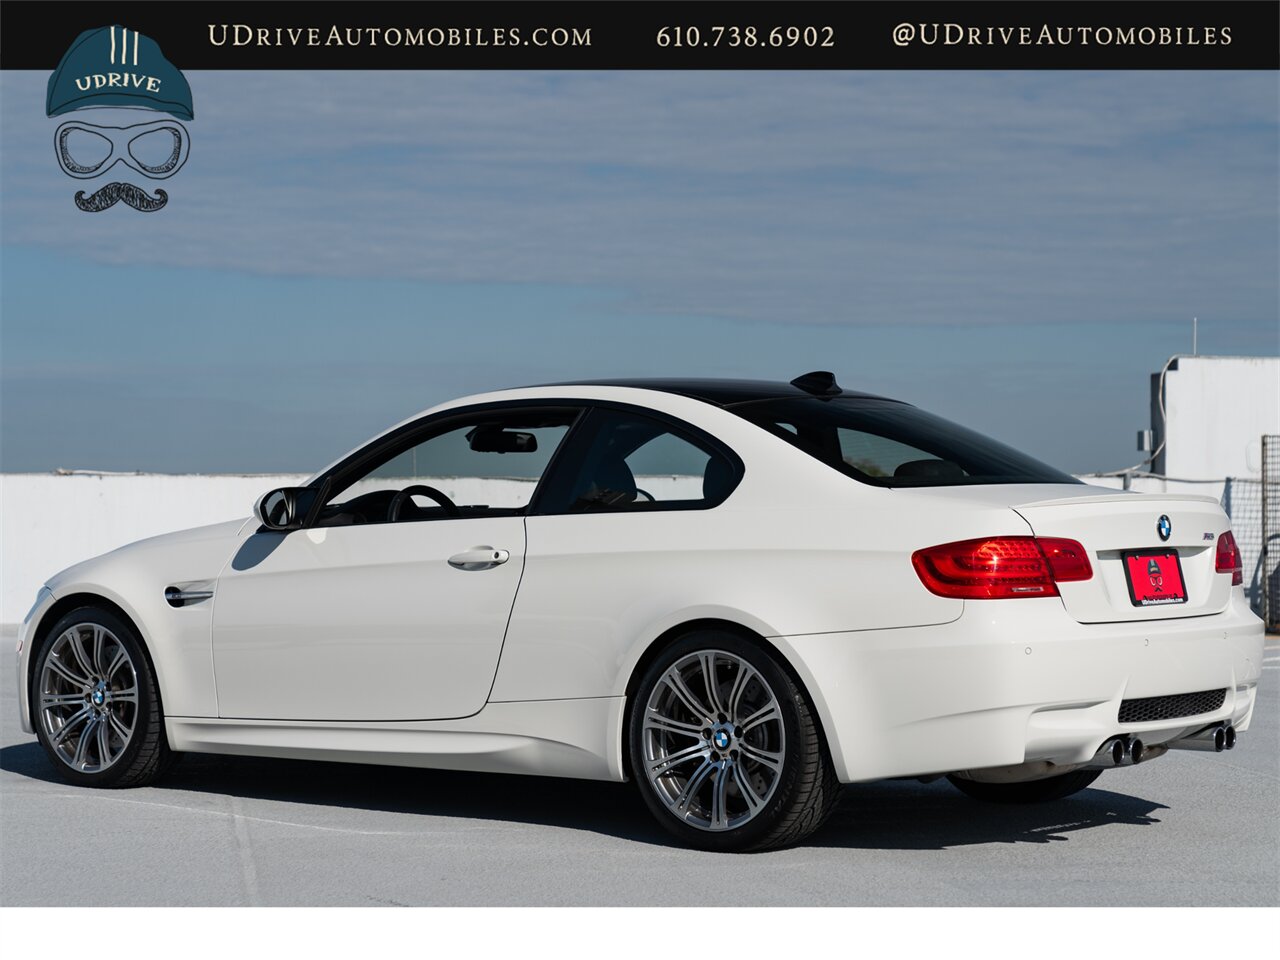 2011 BMW M3  No Nav Carbon Roof Comf Acc 19in Whls 11k Miles - Photo 24 - West Chester, PA 19382